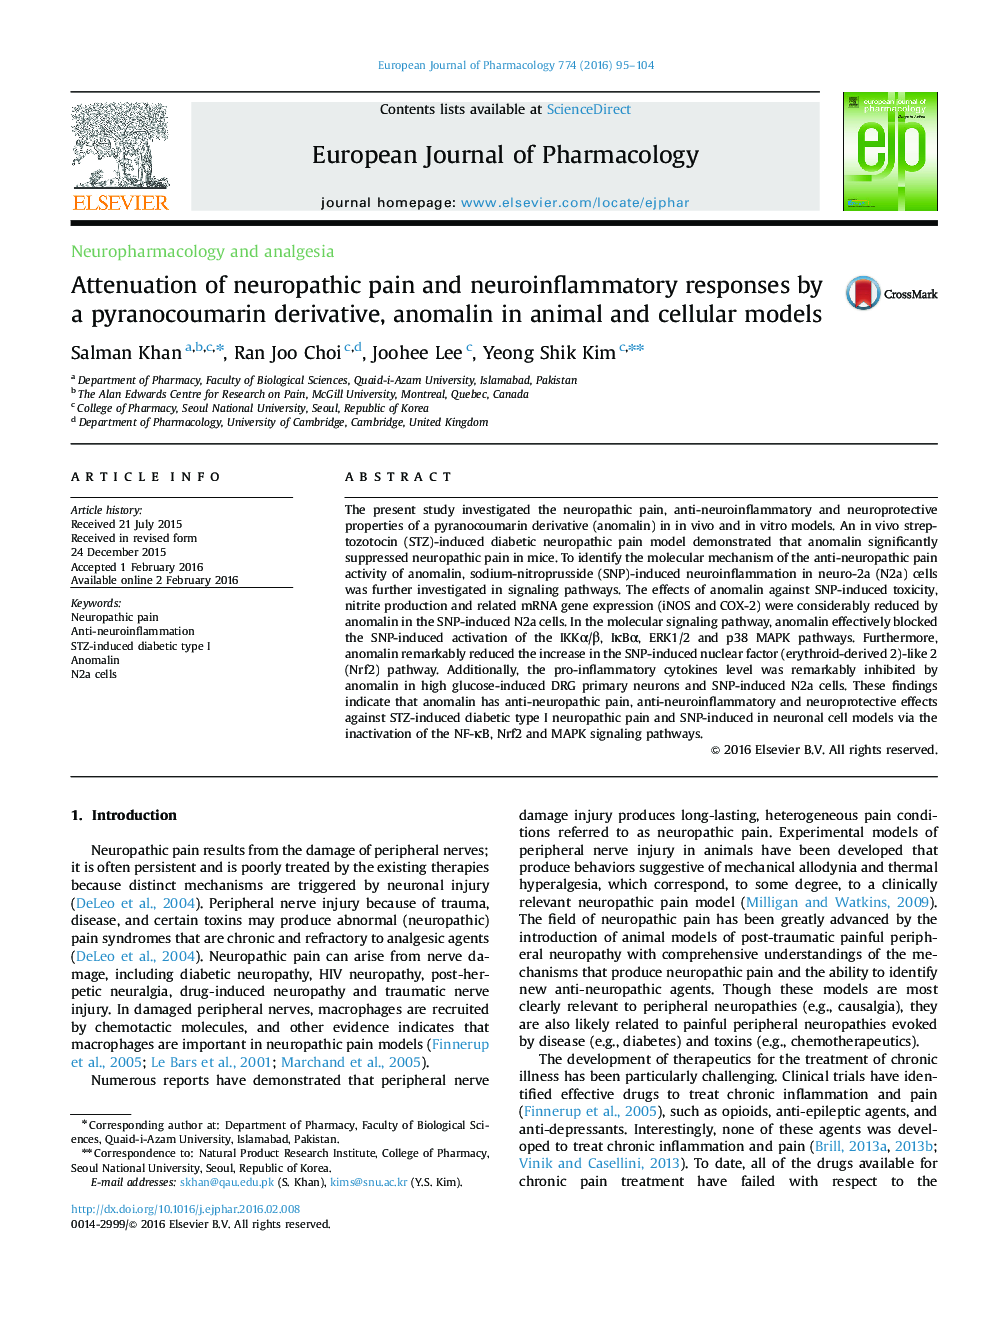 Attenuation of neuropathic pain and neuroinflammatory responses by a pyranocoumarin derivative, anomalin in animal and cellular models